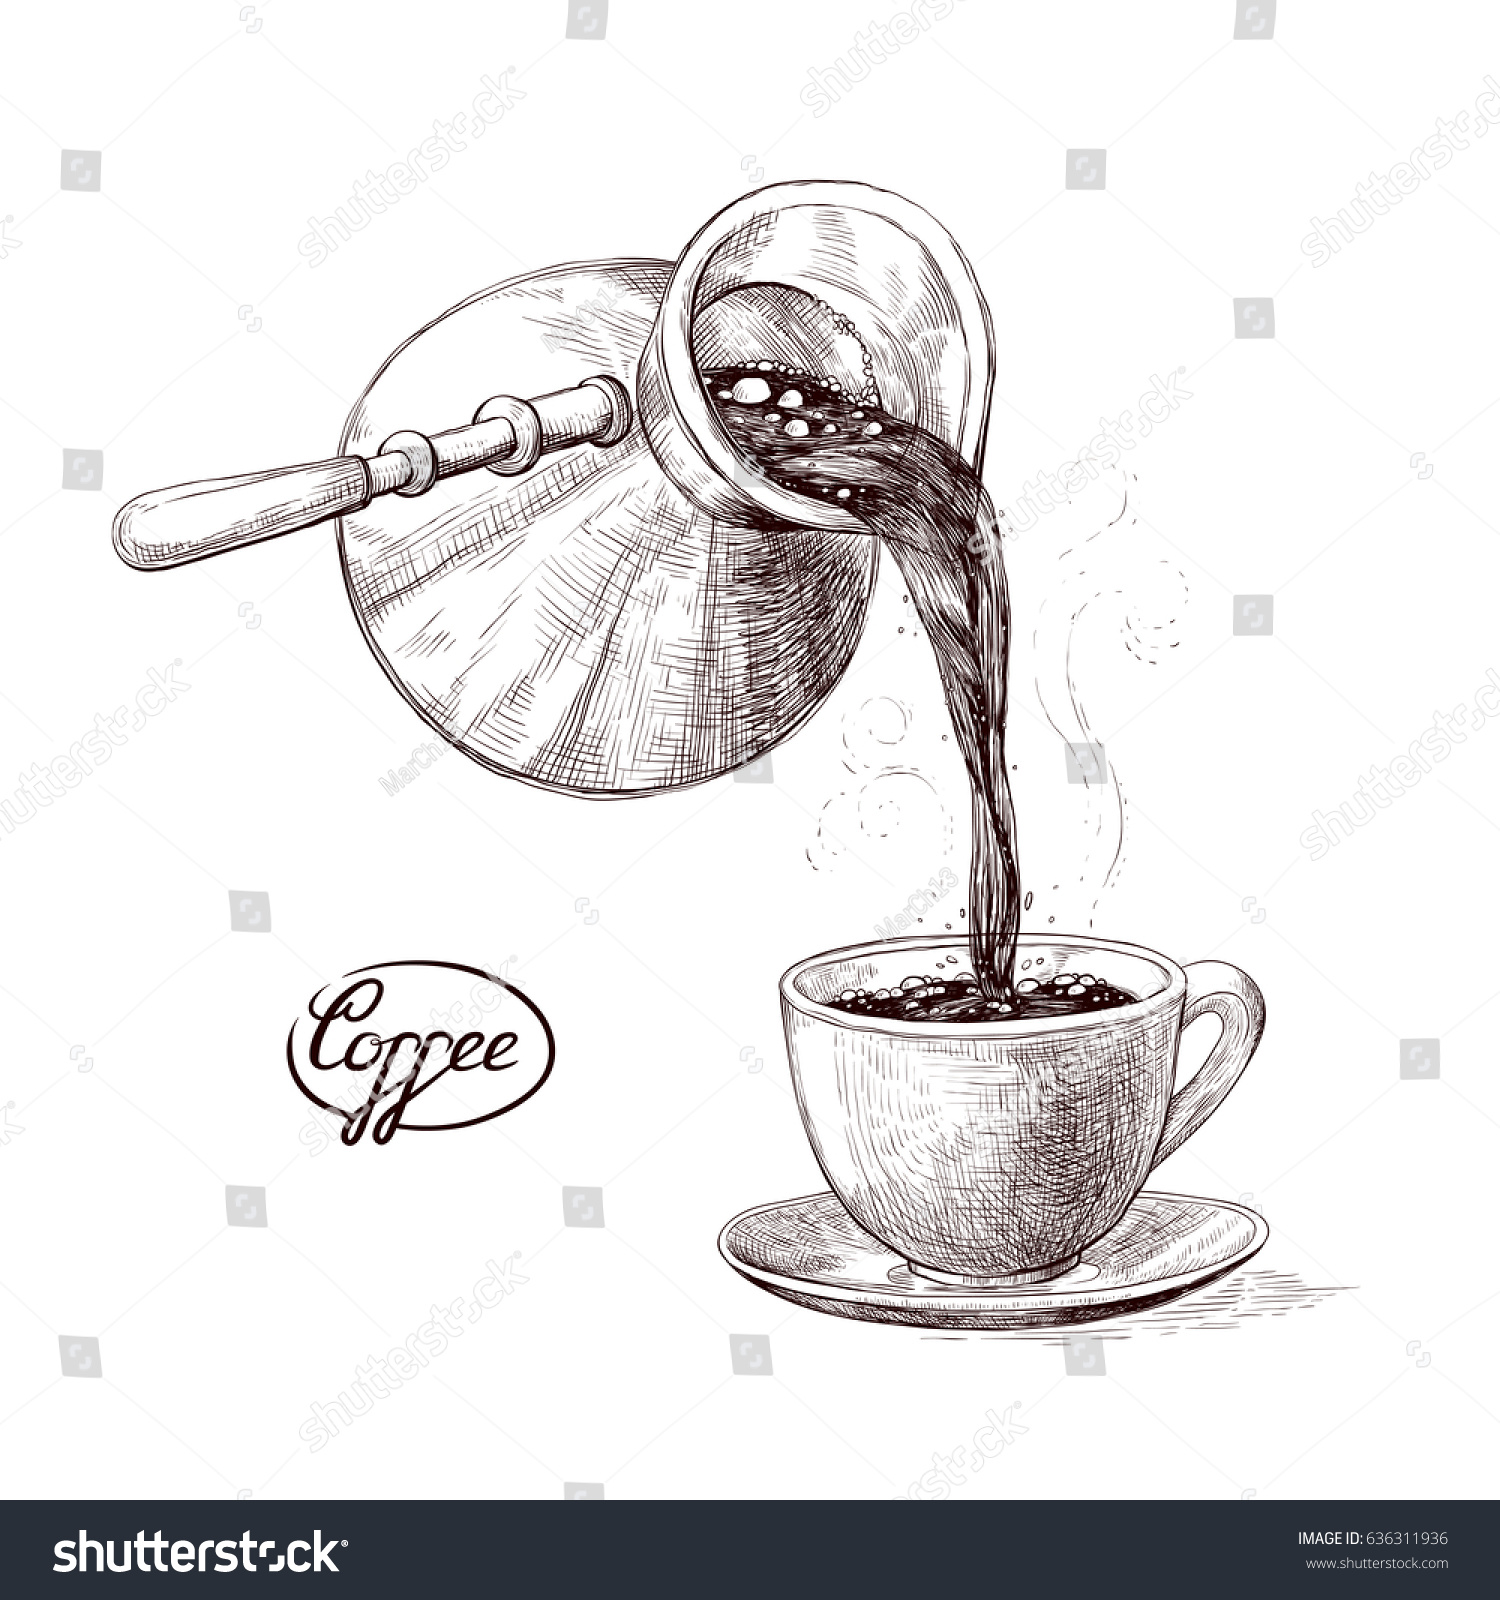 SVG of Vector sketch illustration of fresh brewed hot and flavored morning coffee from the turks poured into the cup. Drink with splashes and steam pouring into the bowl. Imitation vintage engraving svg